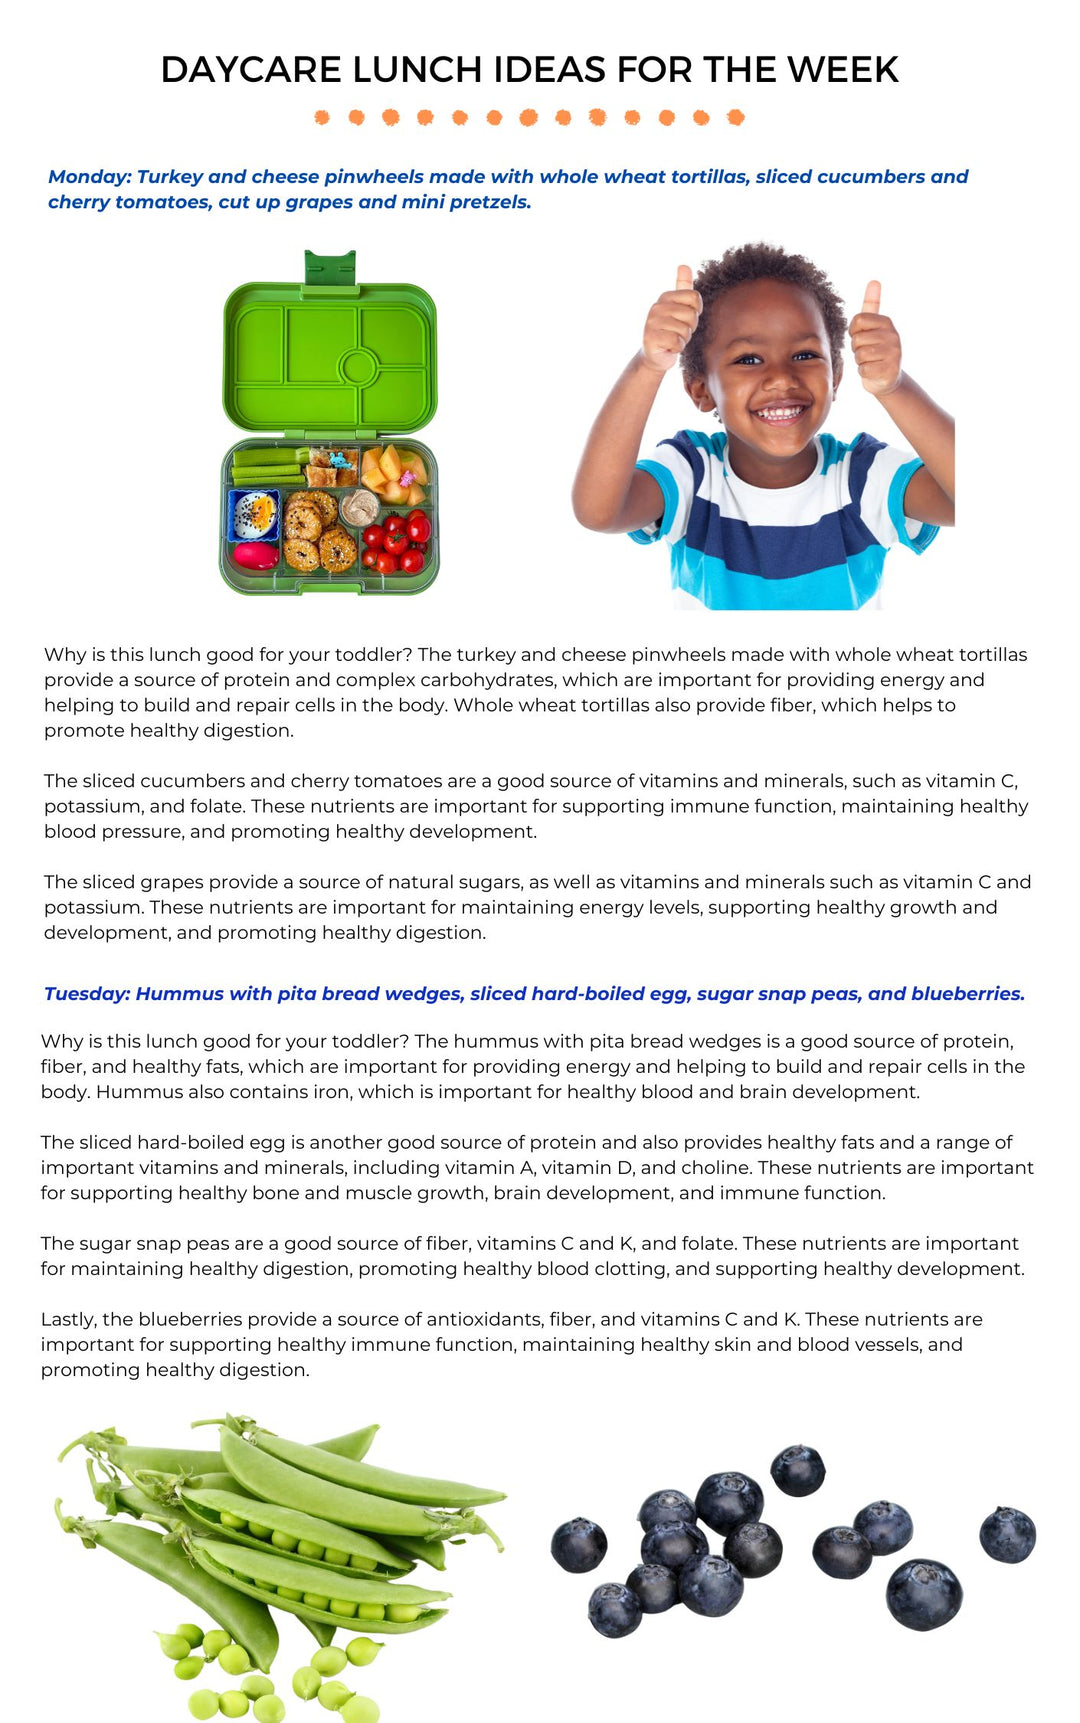 E-Book: Prep, Pack and Rock Your Yumbox